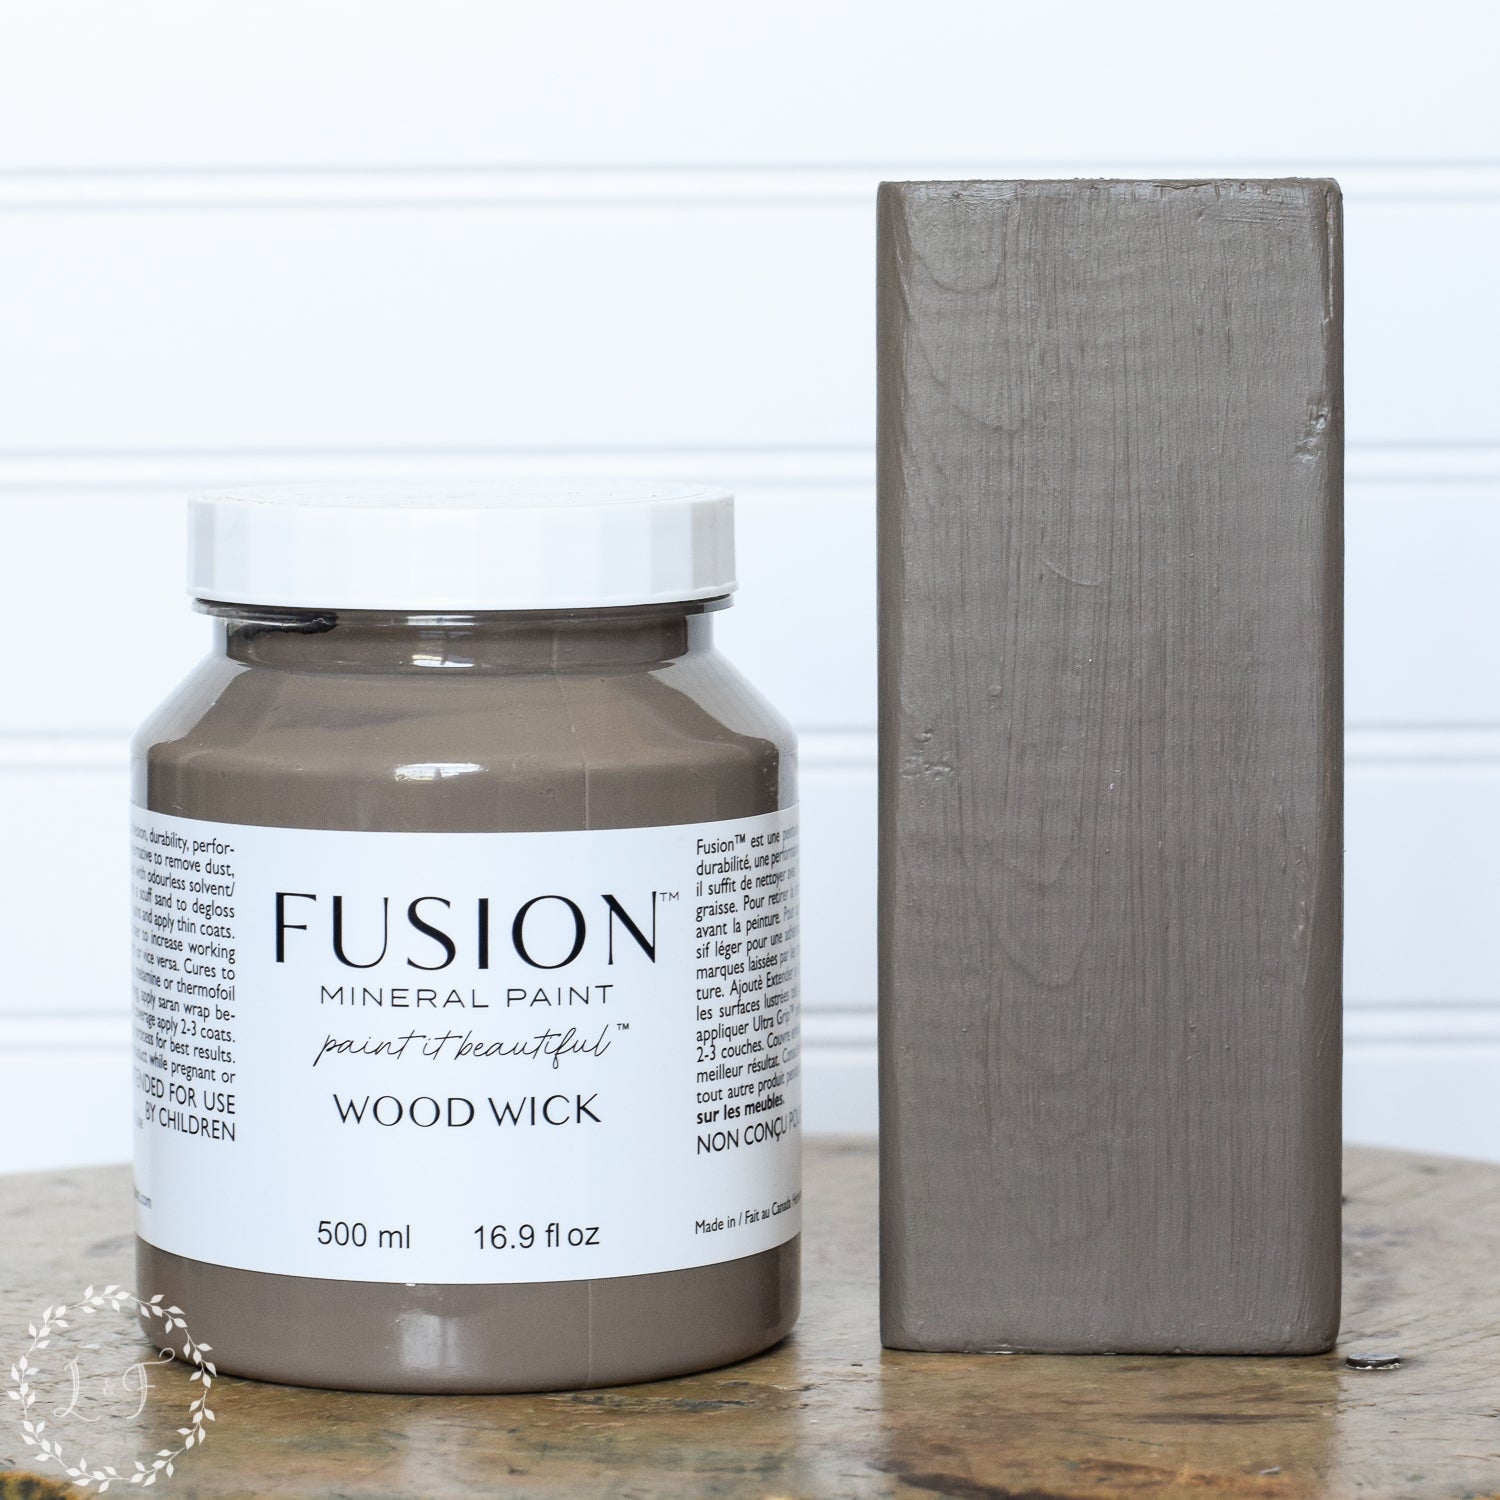 Fusion Mineral Paint - Wood Wick Tester (1.25oz)